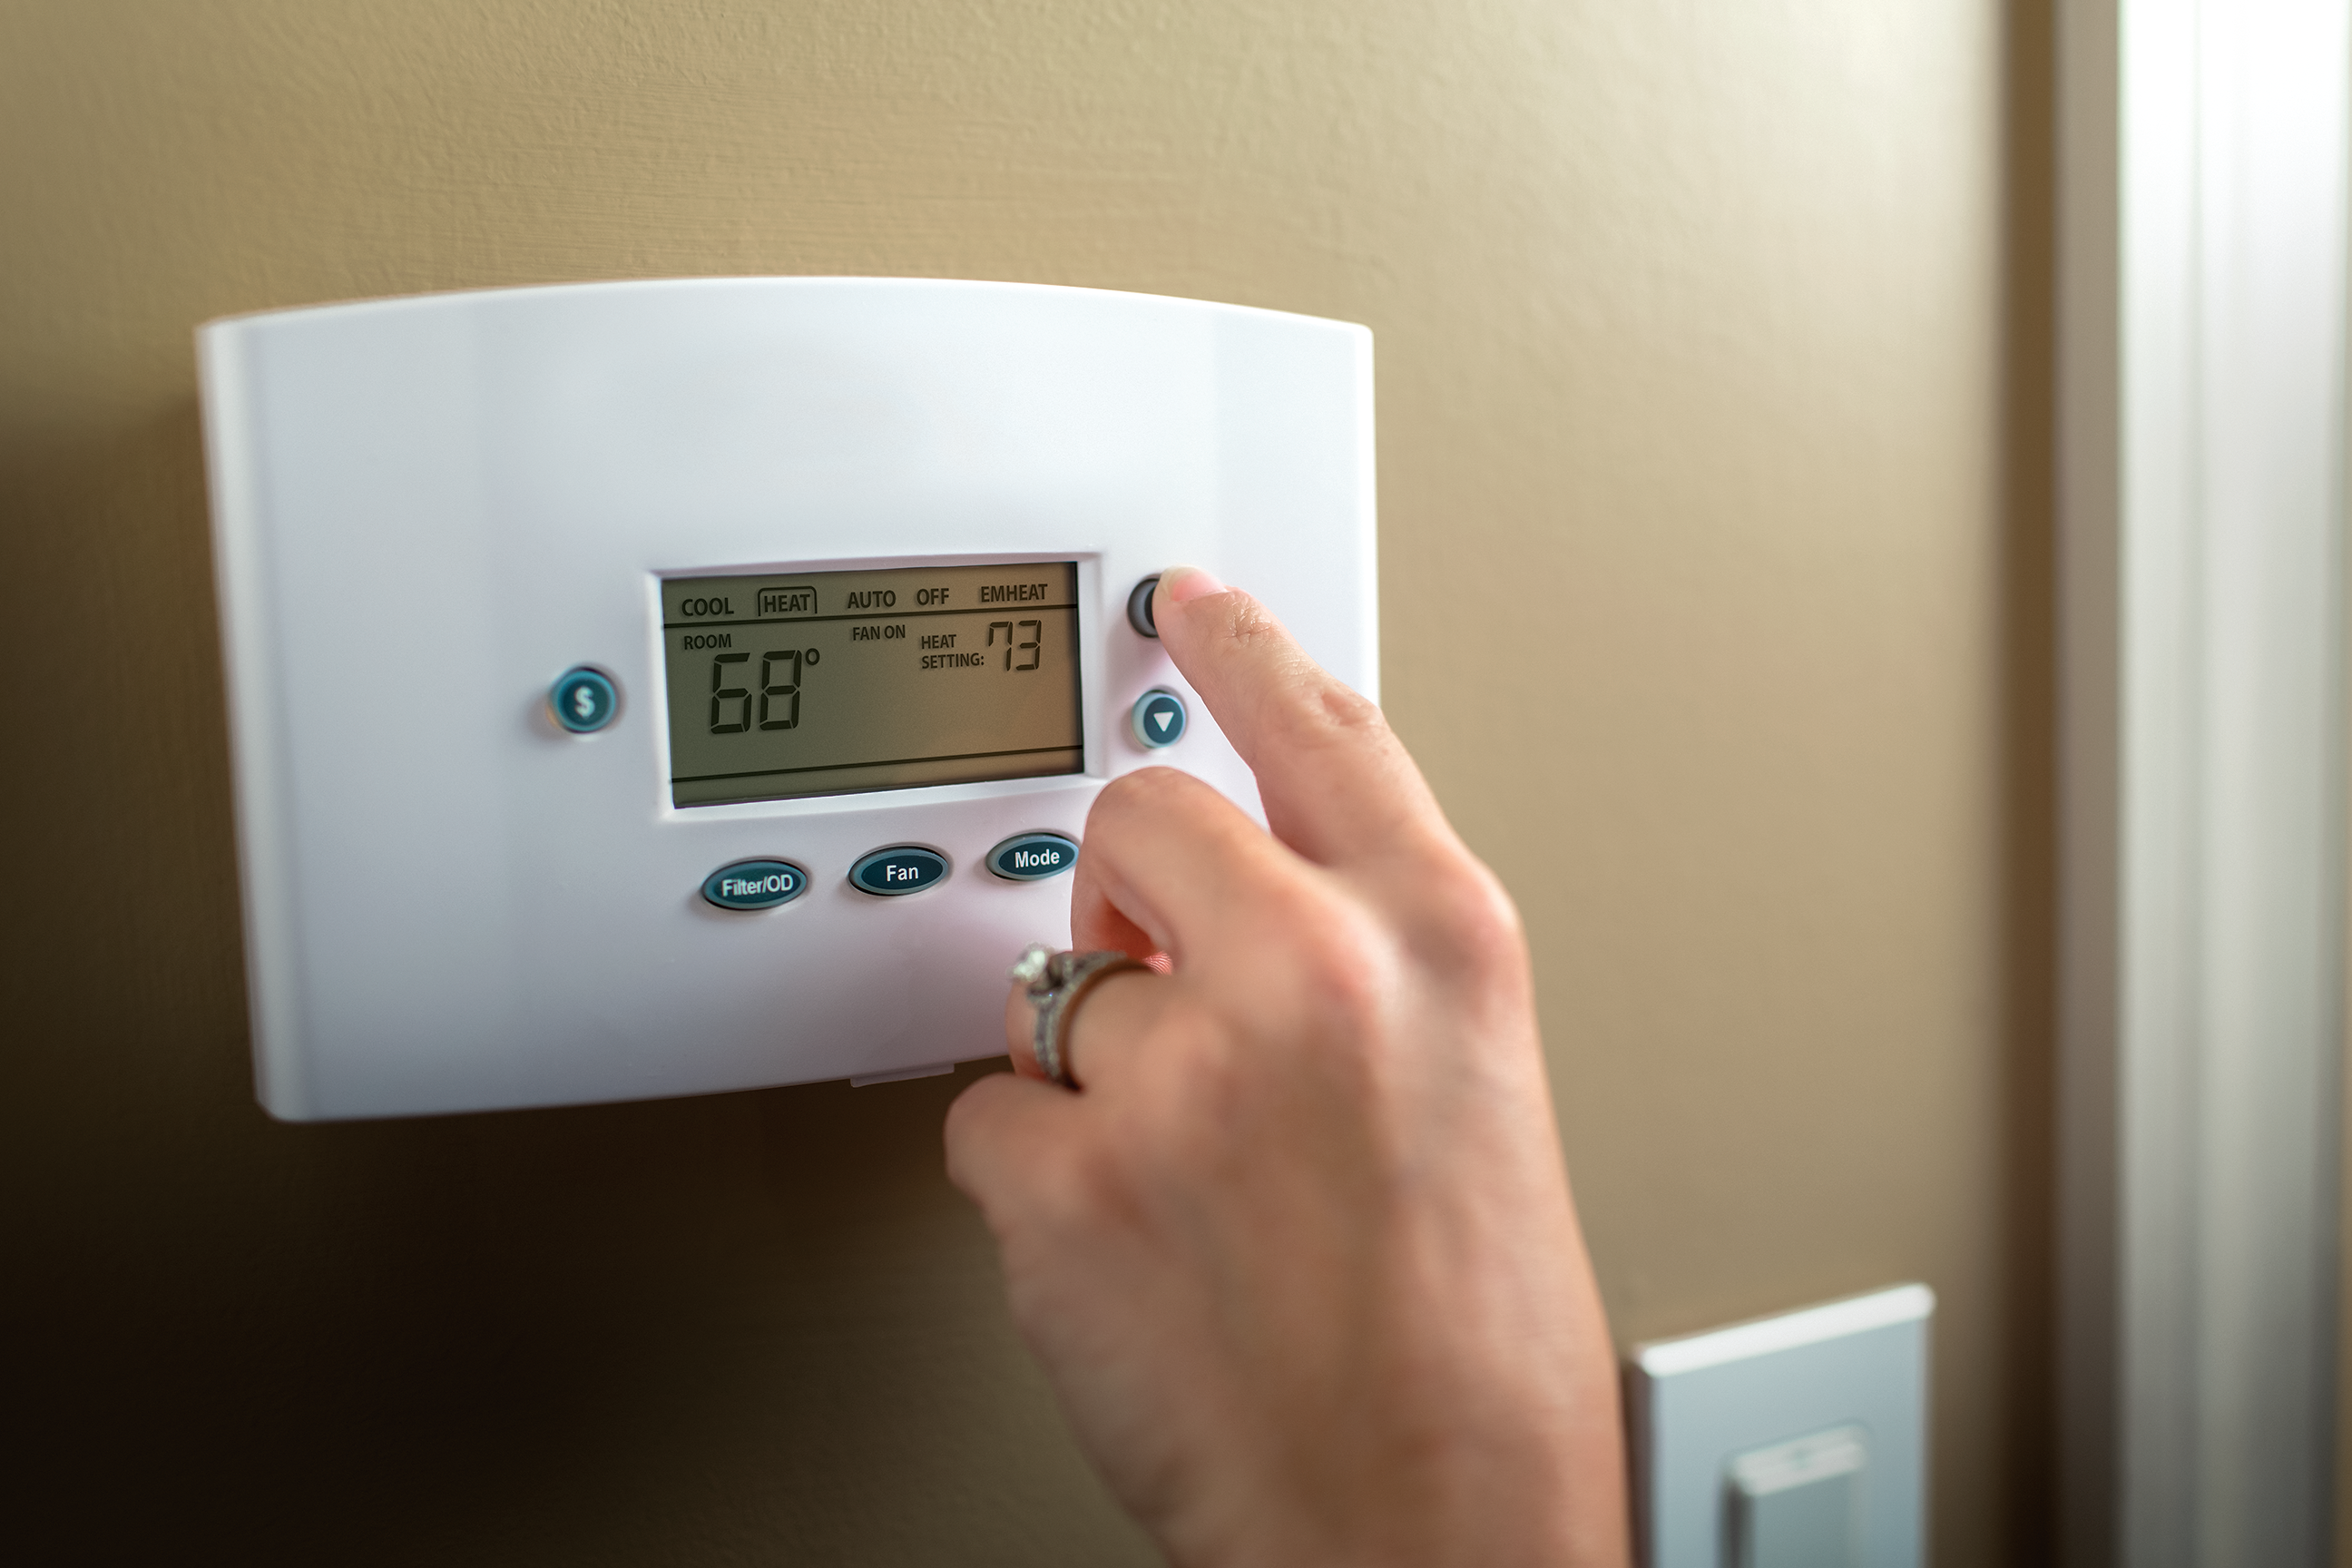 Don't Let Your Heating Budget Cool Down Plan Ahead for Winter